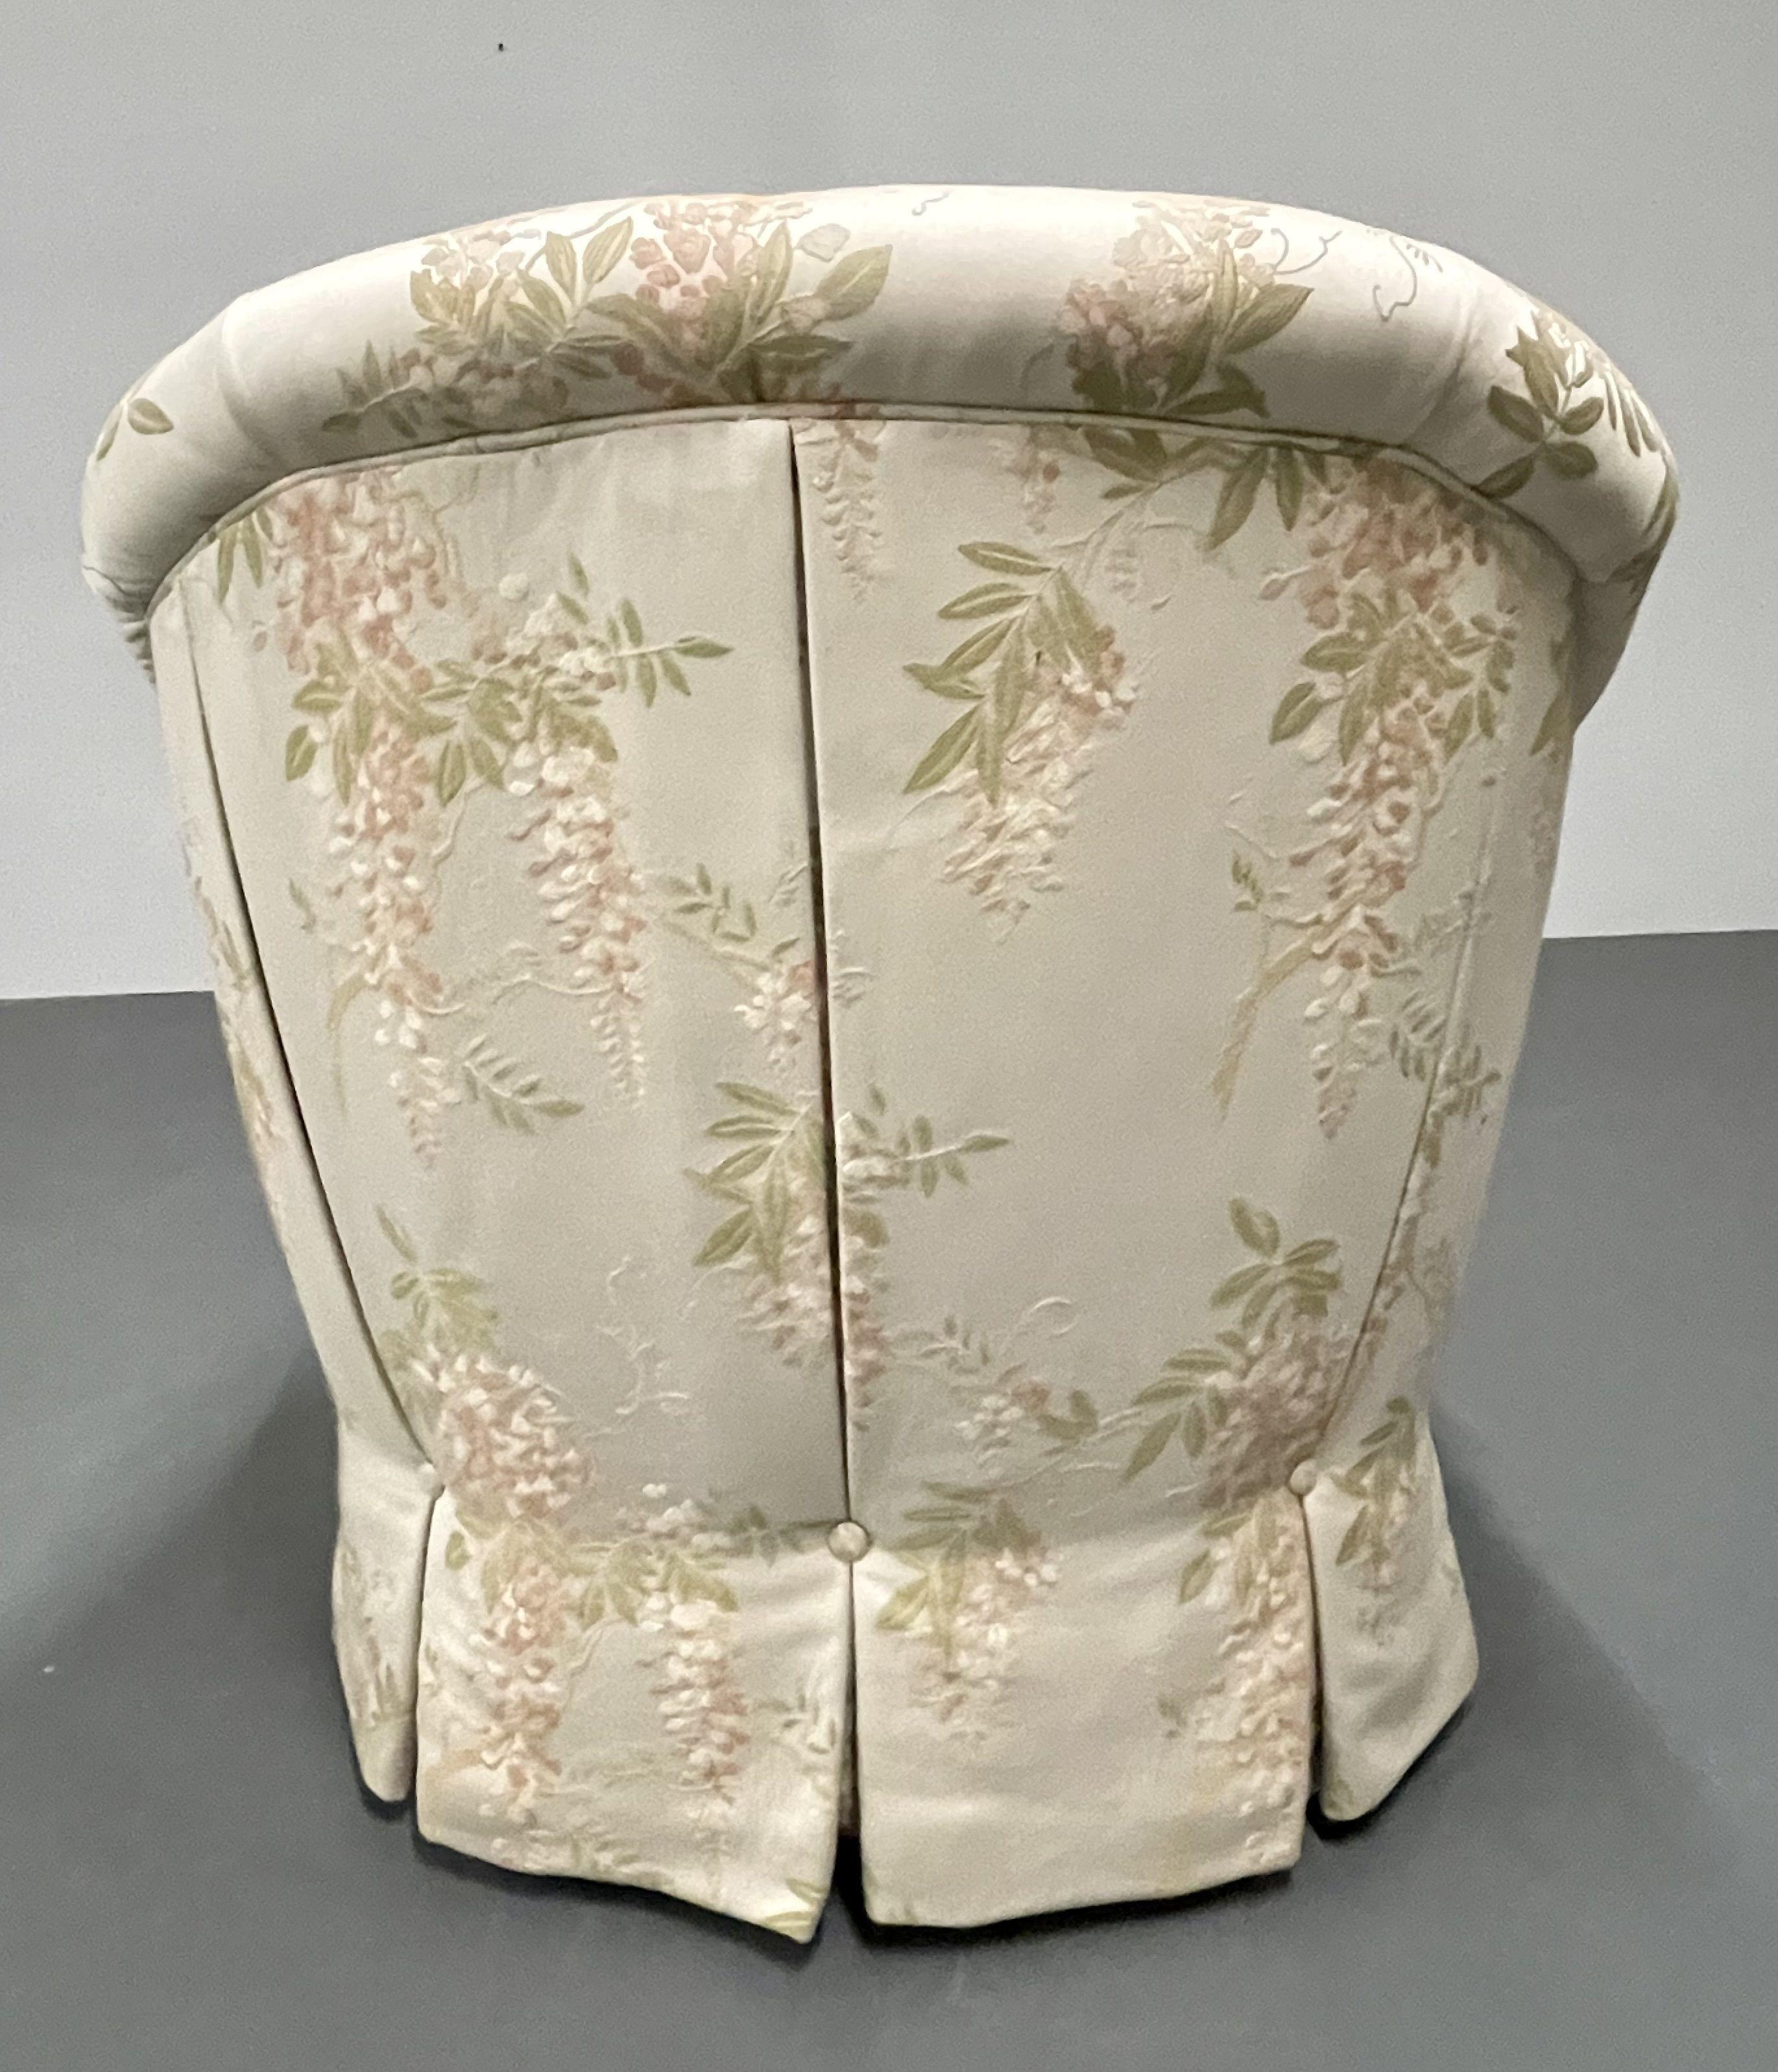 Pair of Floral Swivel Chairs, Milo Baughman, Scalamandré, Lounge Chairs 2